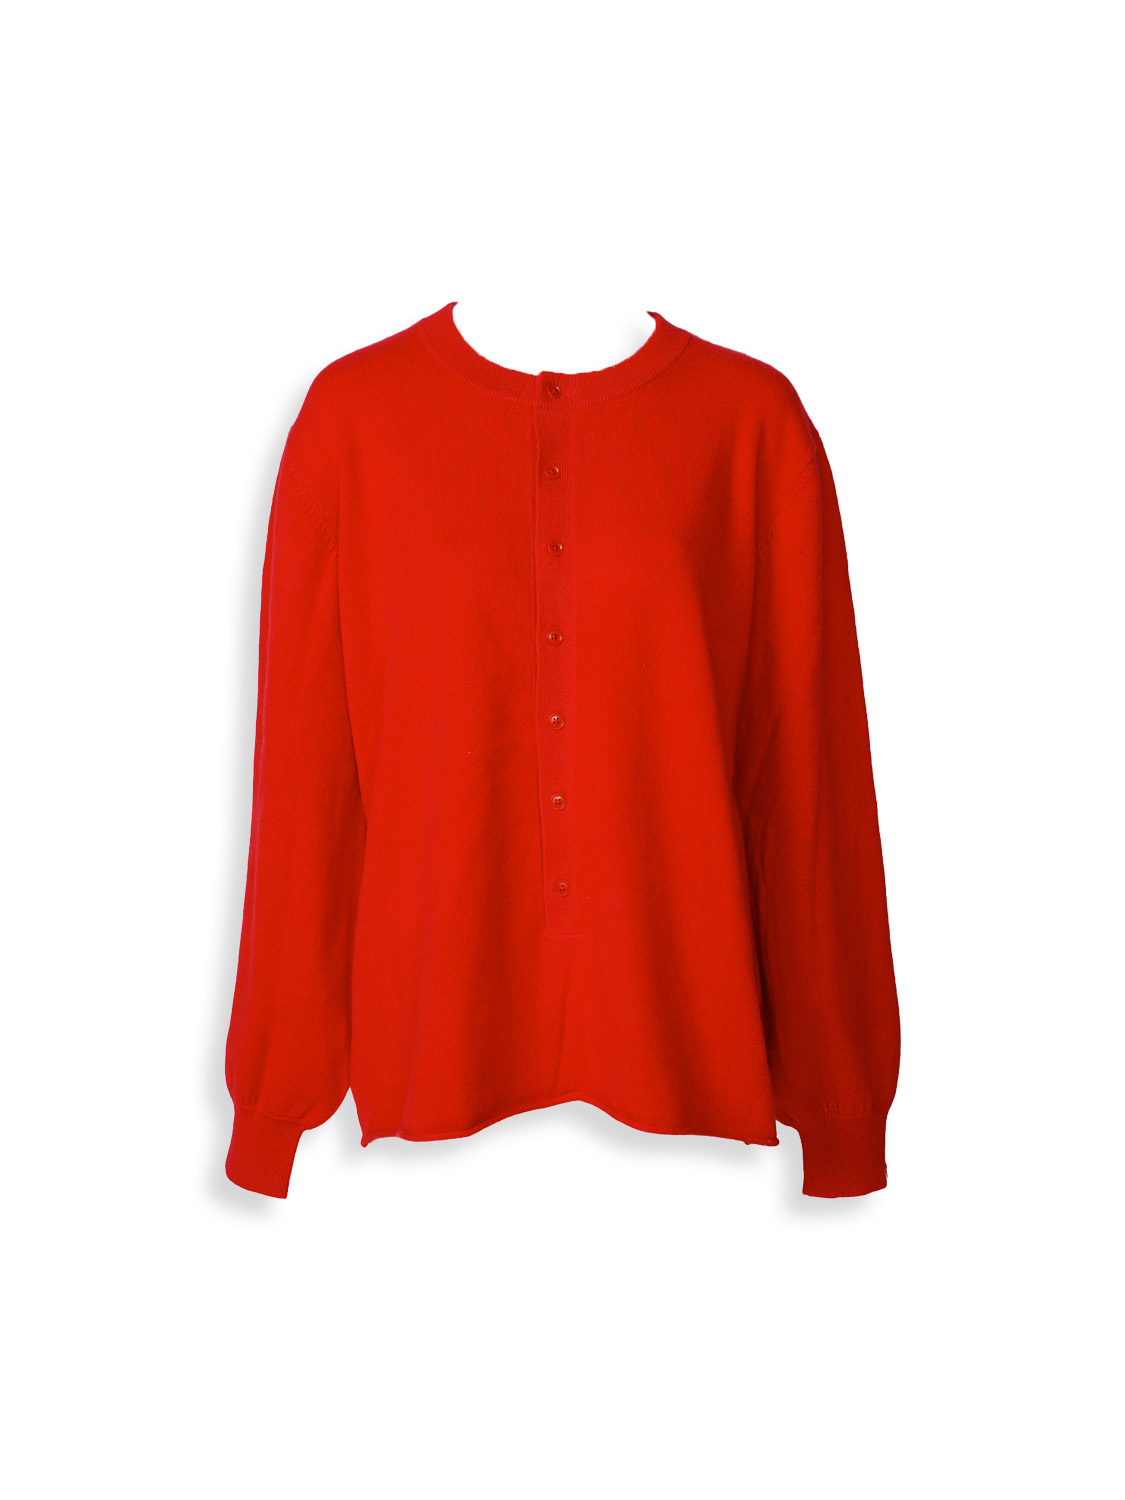 n° 280 Bi - Cashmere button front sweater